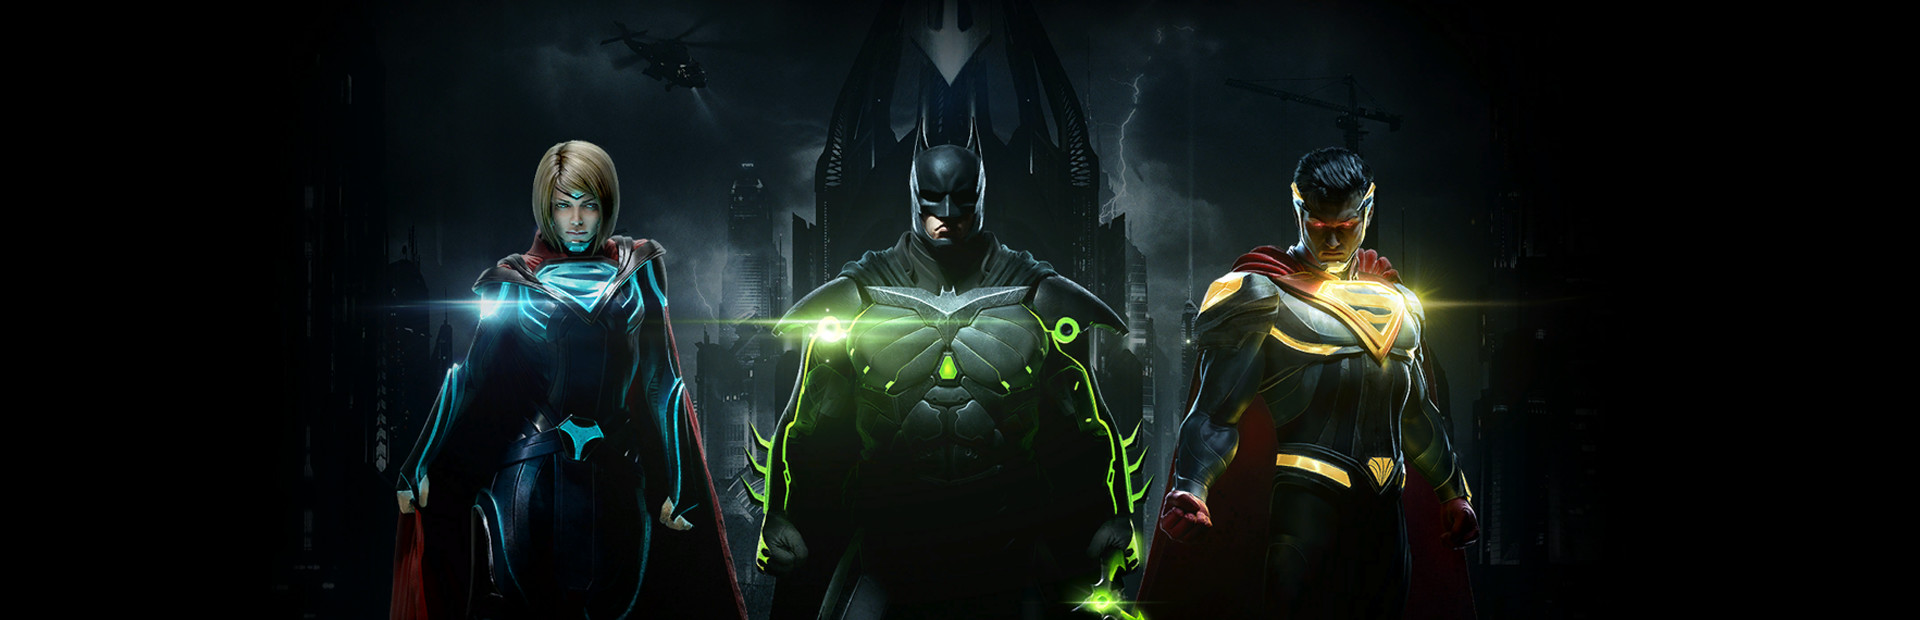 Injustice™ 2 cover image